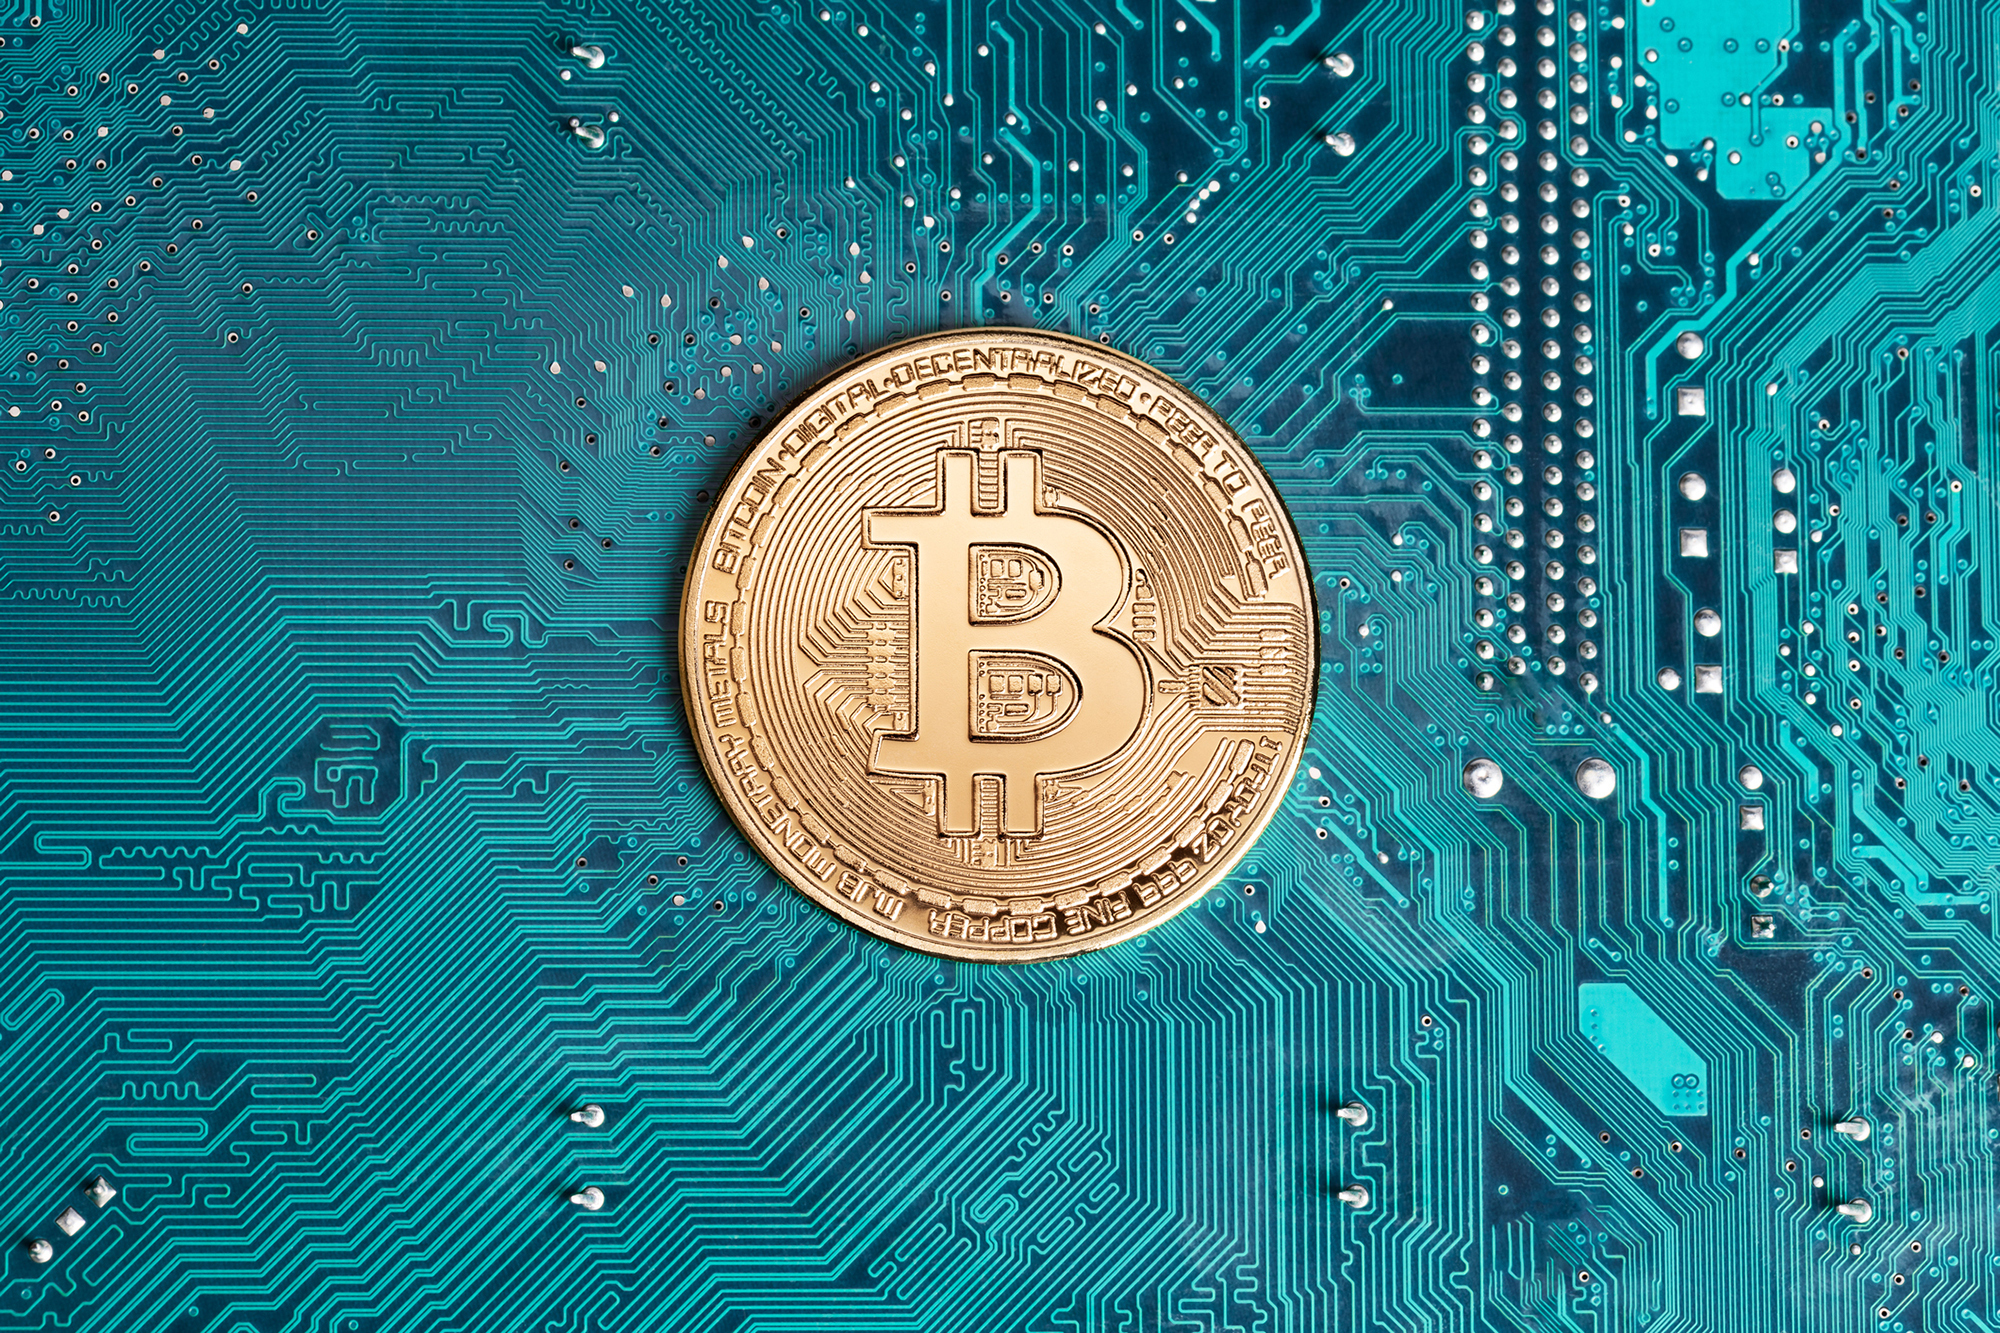 In recent years, more people are investing in non-traditional assets such as the cryptocurrency. | Photo by Getty Images via Penn Today